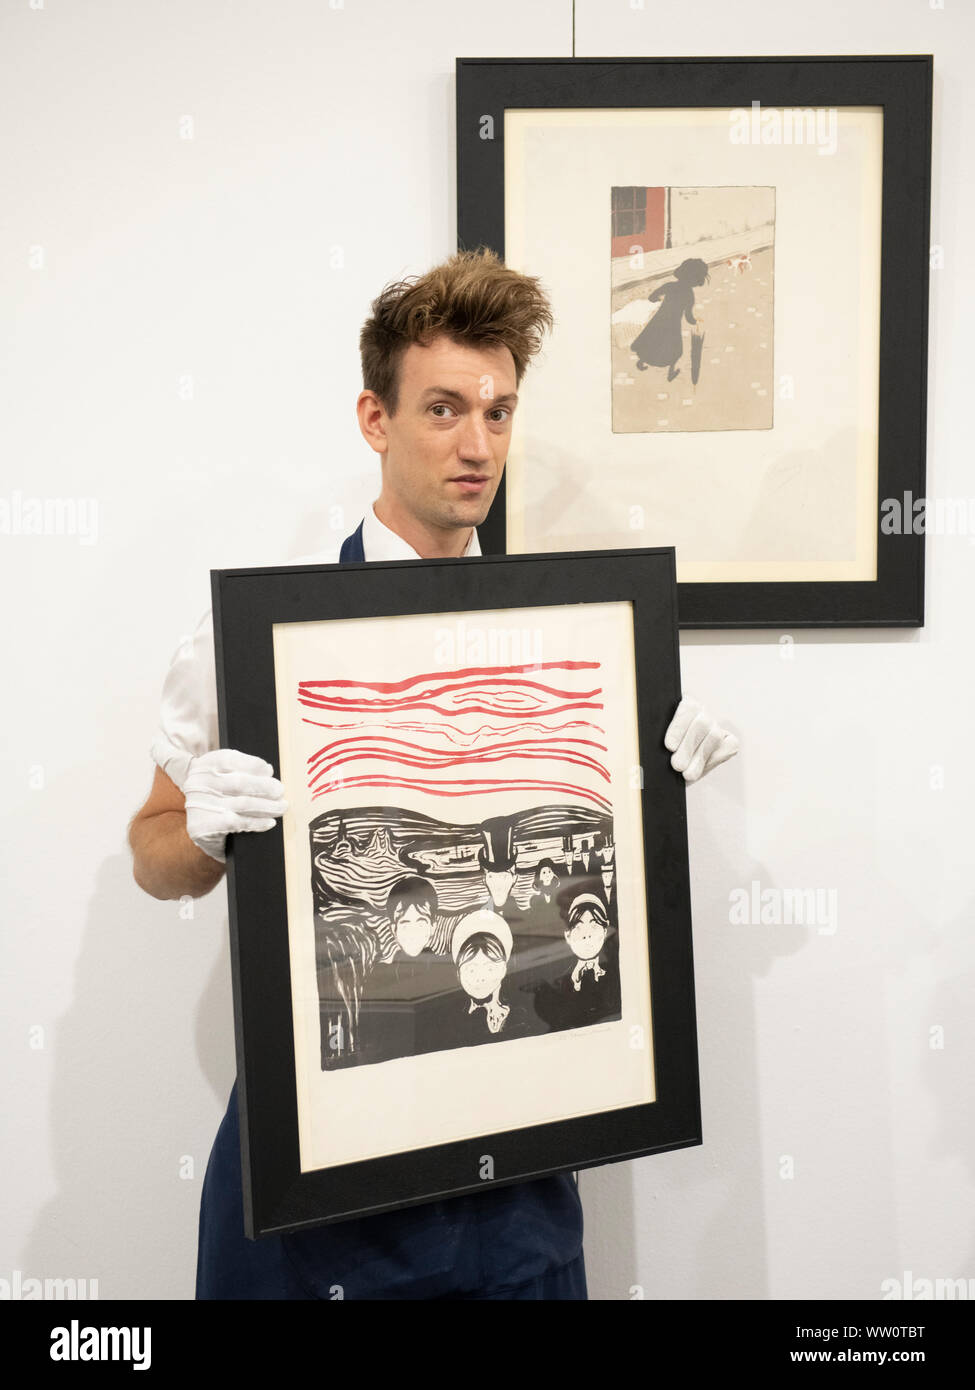 Sotheby’s, London, UK. 12th September 2019. The complete, multi-artist album Les Peintres-Graveurs will be offered at auction in London on Sept 17th, estimate £500,000 - £1,000,000. Initially produced in an edition of 100, its appearance at Sotheby’s London will mark the first time the complete portfolio has been exhibited as a whole for over a century,with all 22 prints by artists including Munch, Bonnard, Vuillard, Redon and Renoir. Image Sotheby’s art handler holds Edvard Munch’s Angst (or Le Soir), a work from the collection. Credit: Malcolm Park/Alamy Live News. Stock Photo